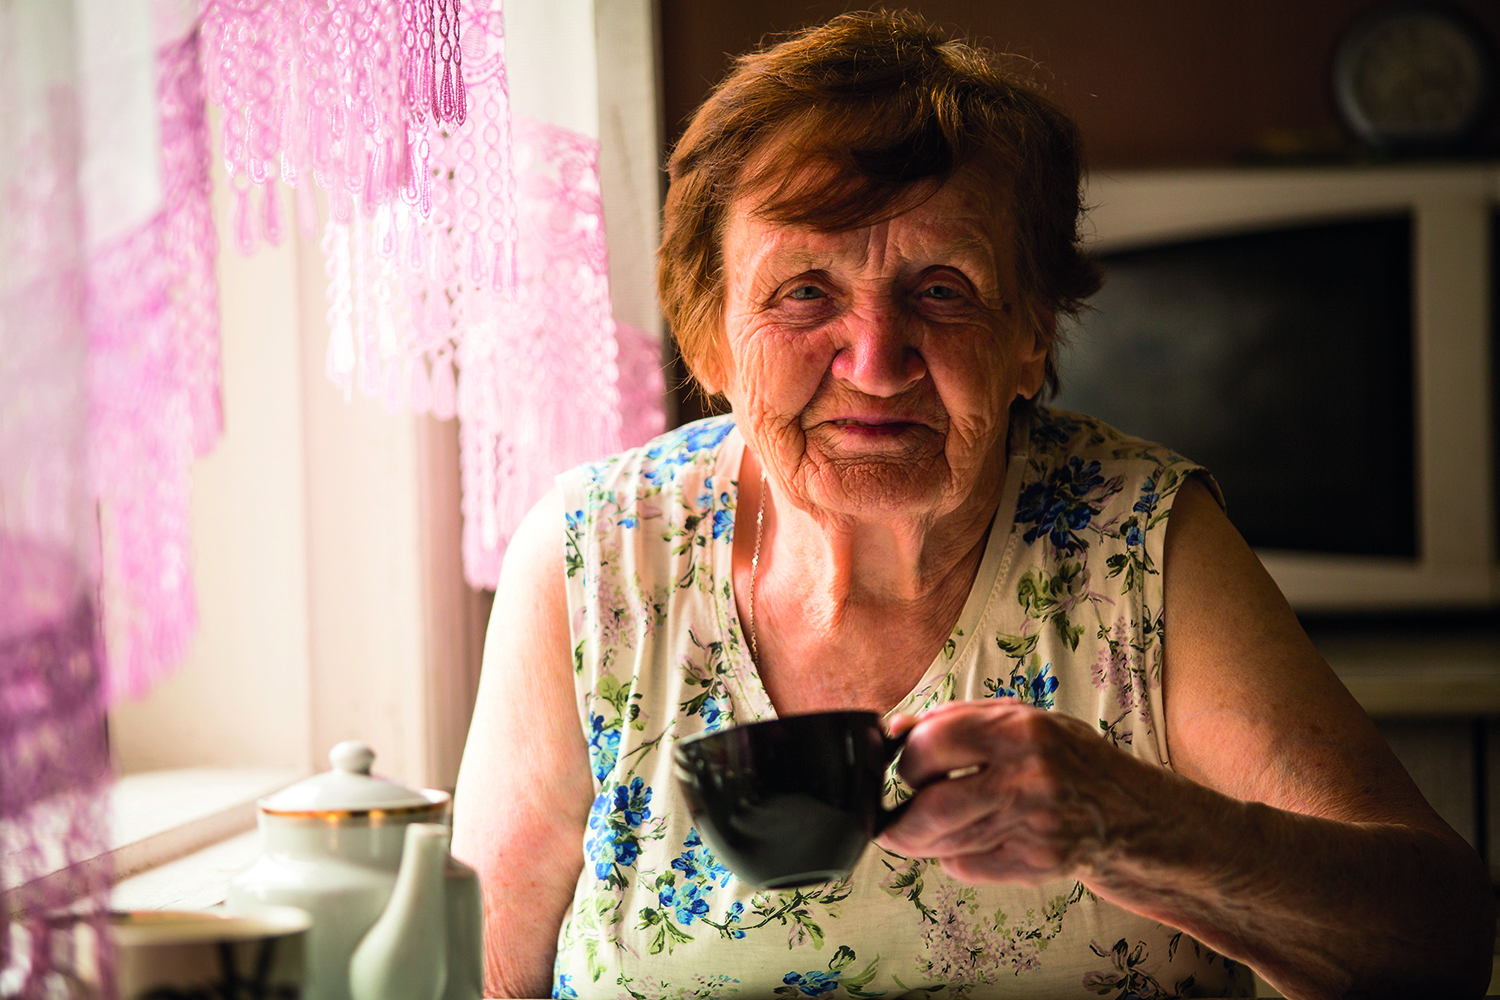 Elderly woman holding a cup in hand.